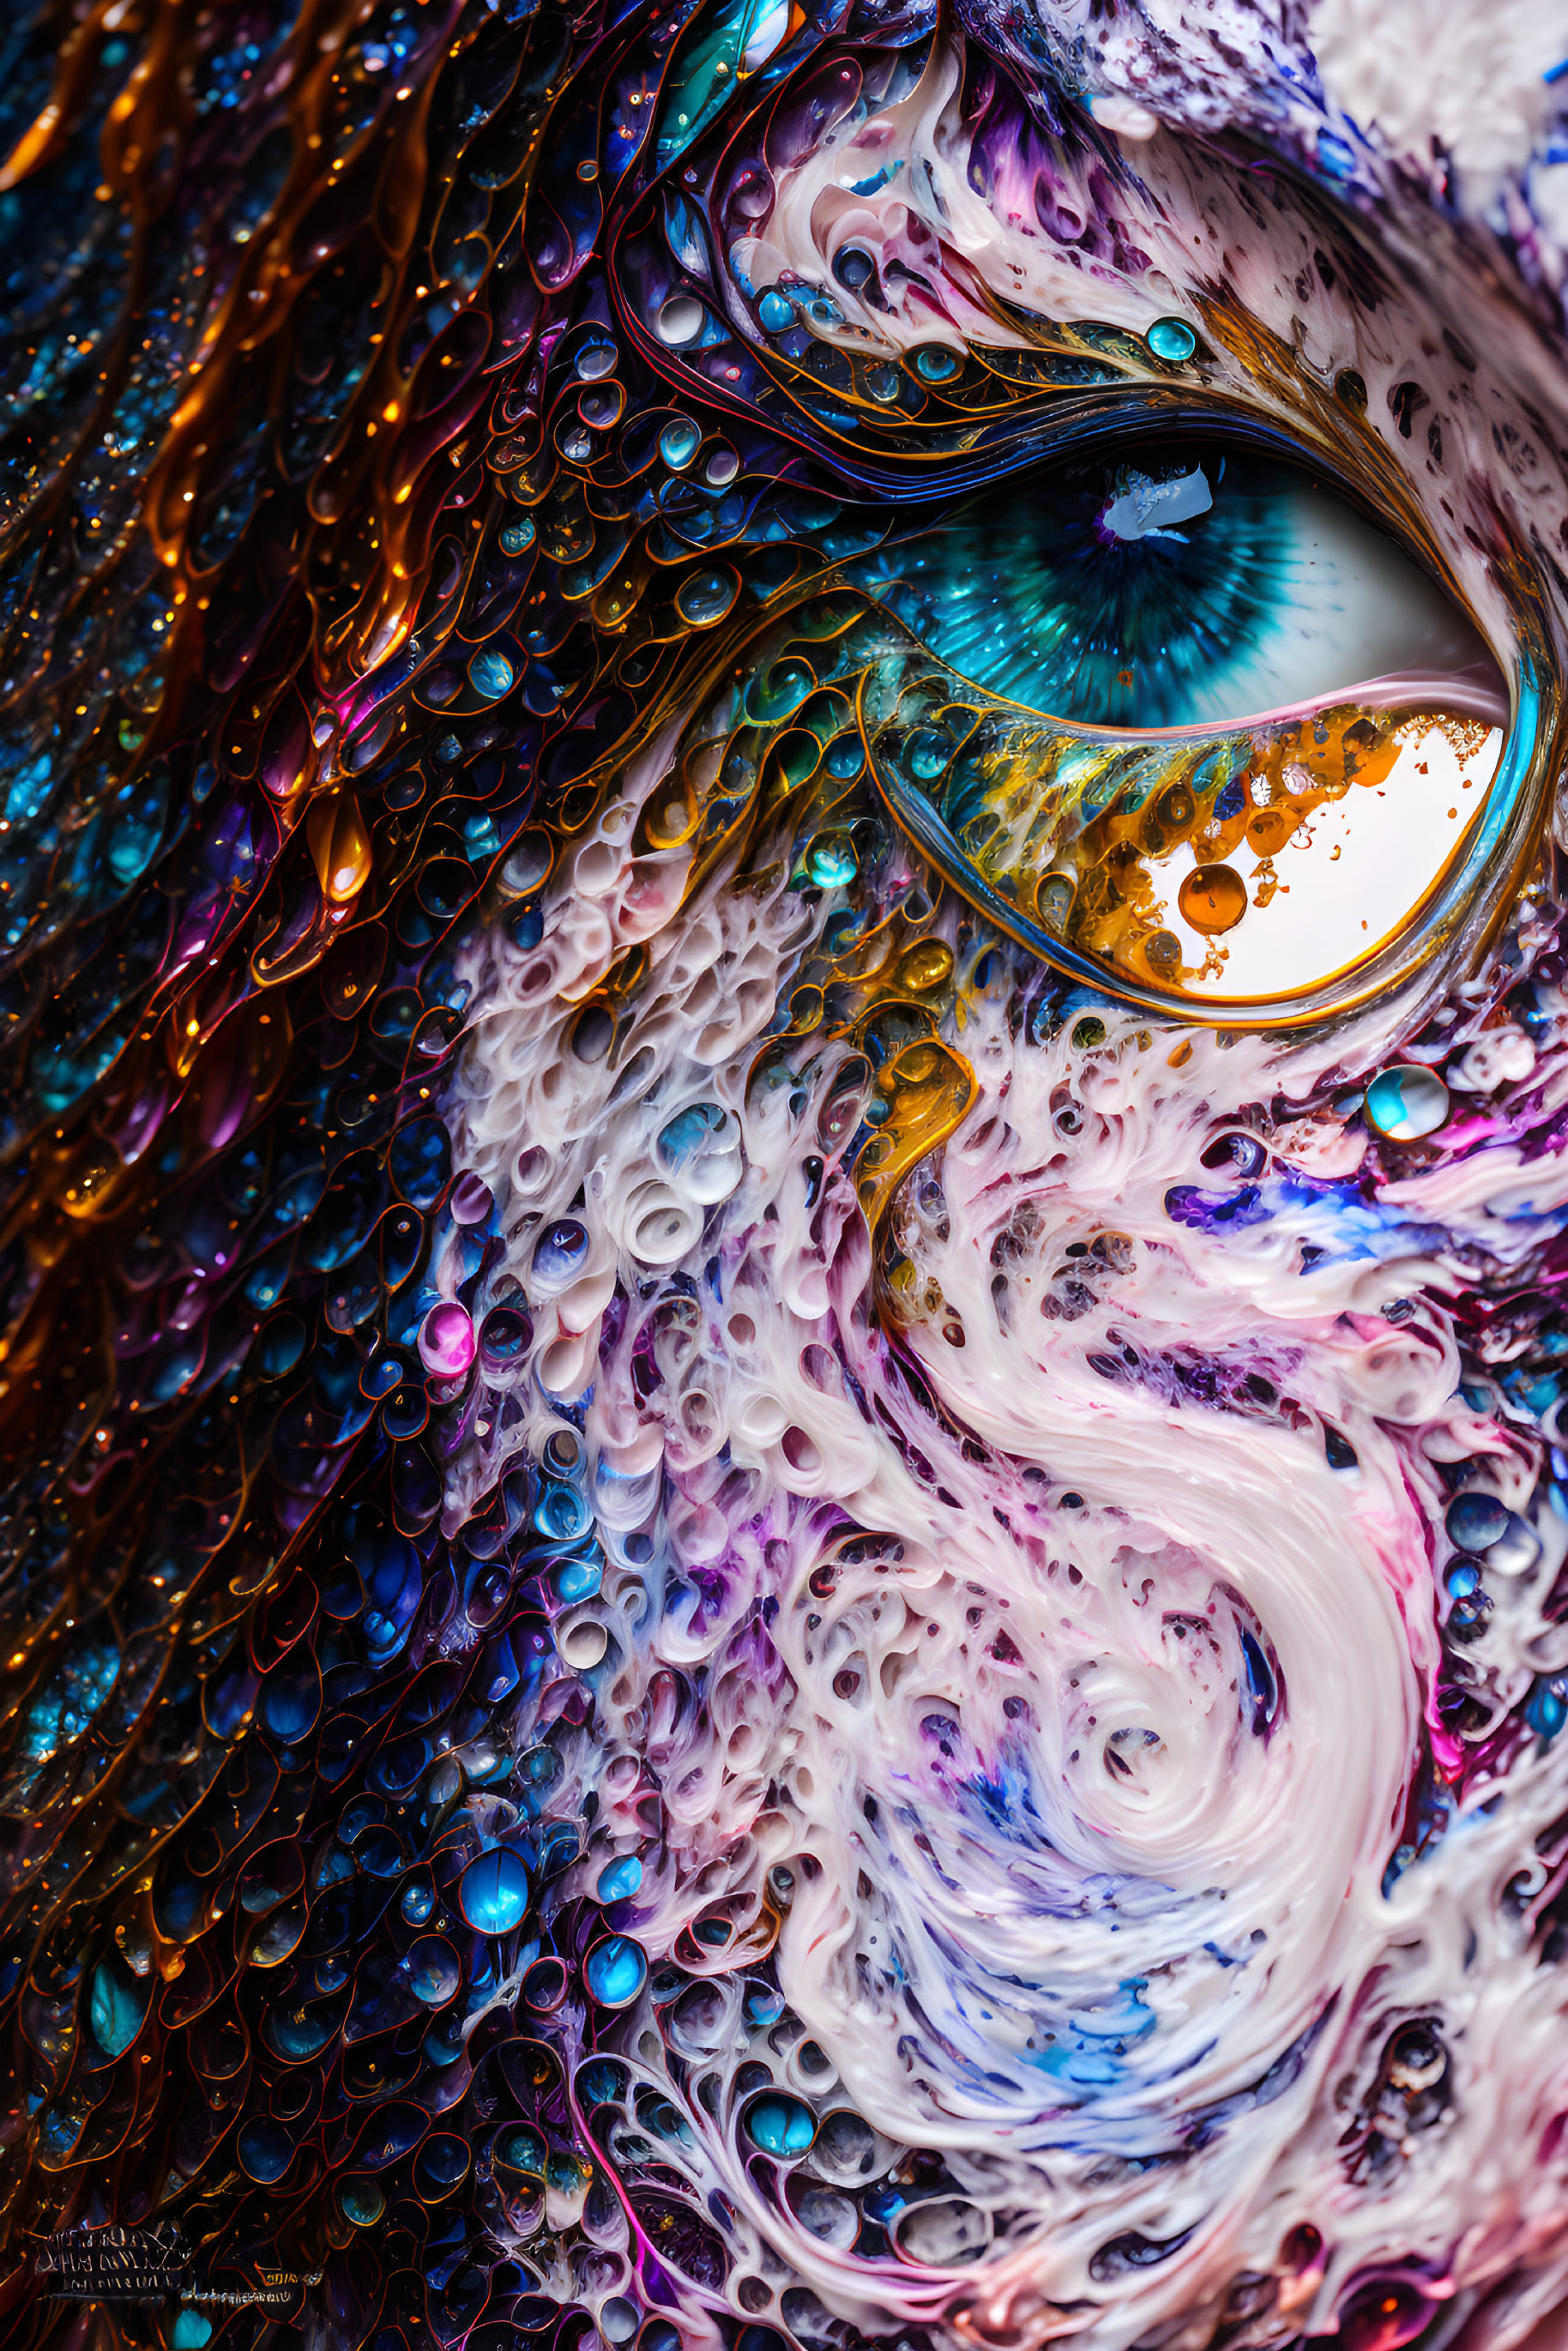 Colorful Swirling Abstract Psychedelic Eye Pattern Close-Up